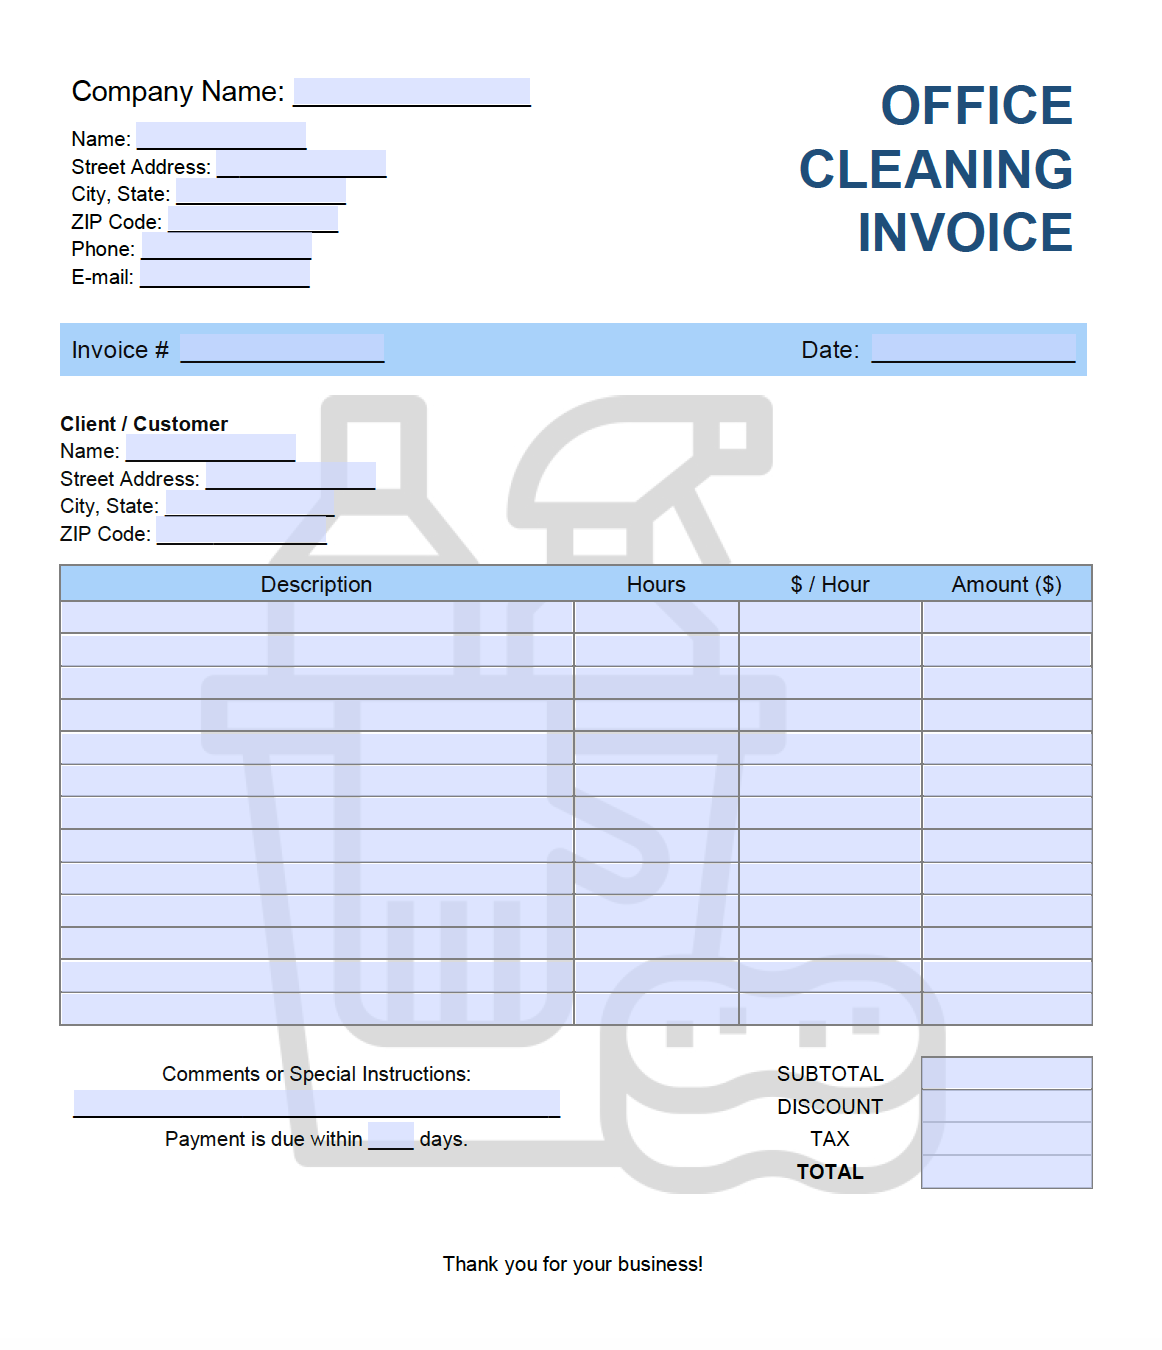 Invoice Template For Cleaning Services Mundoalbiceleste Blog